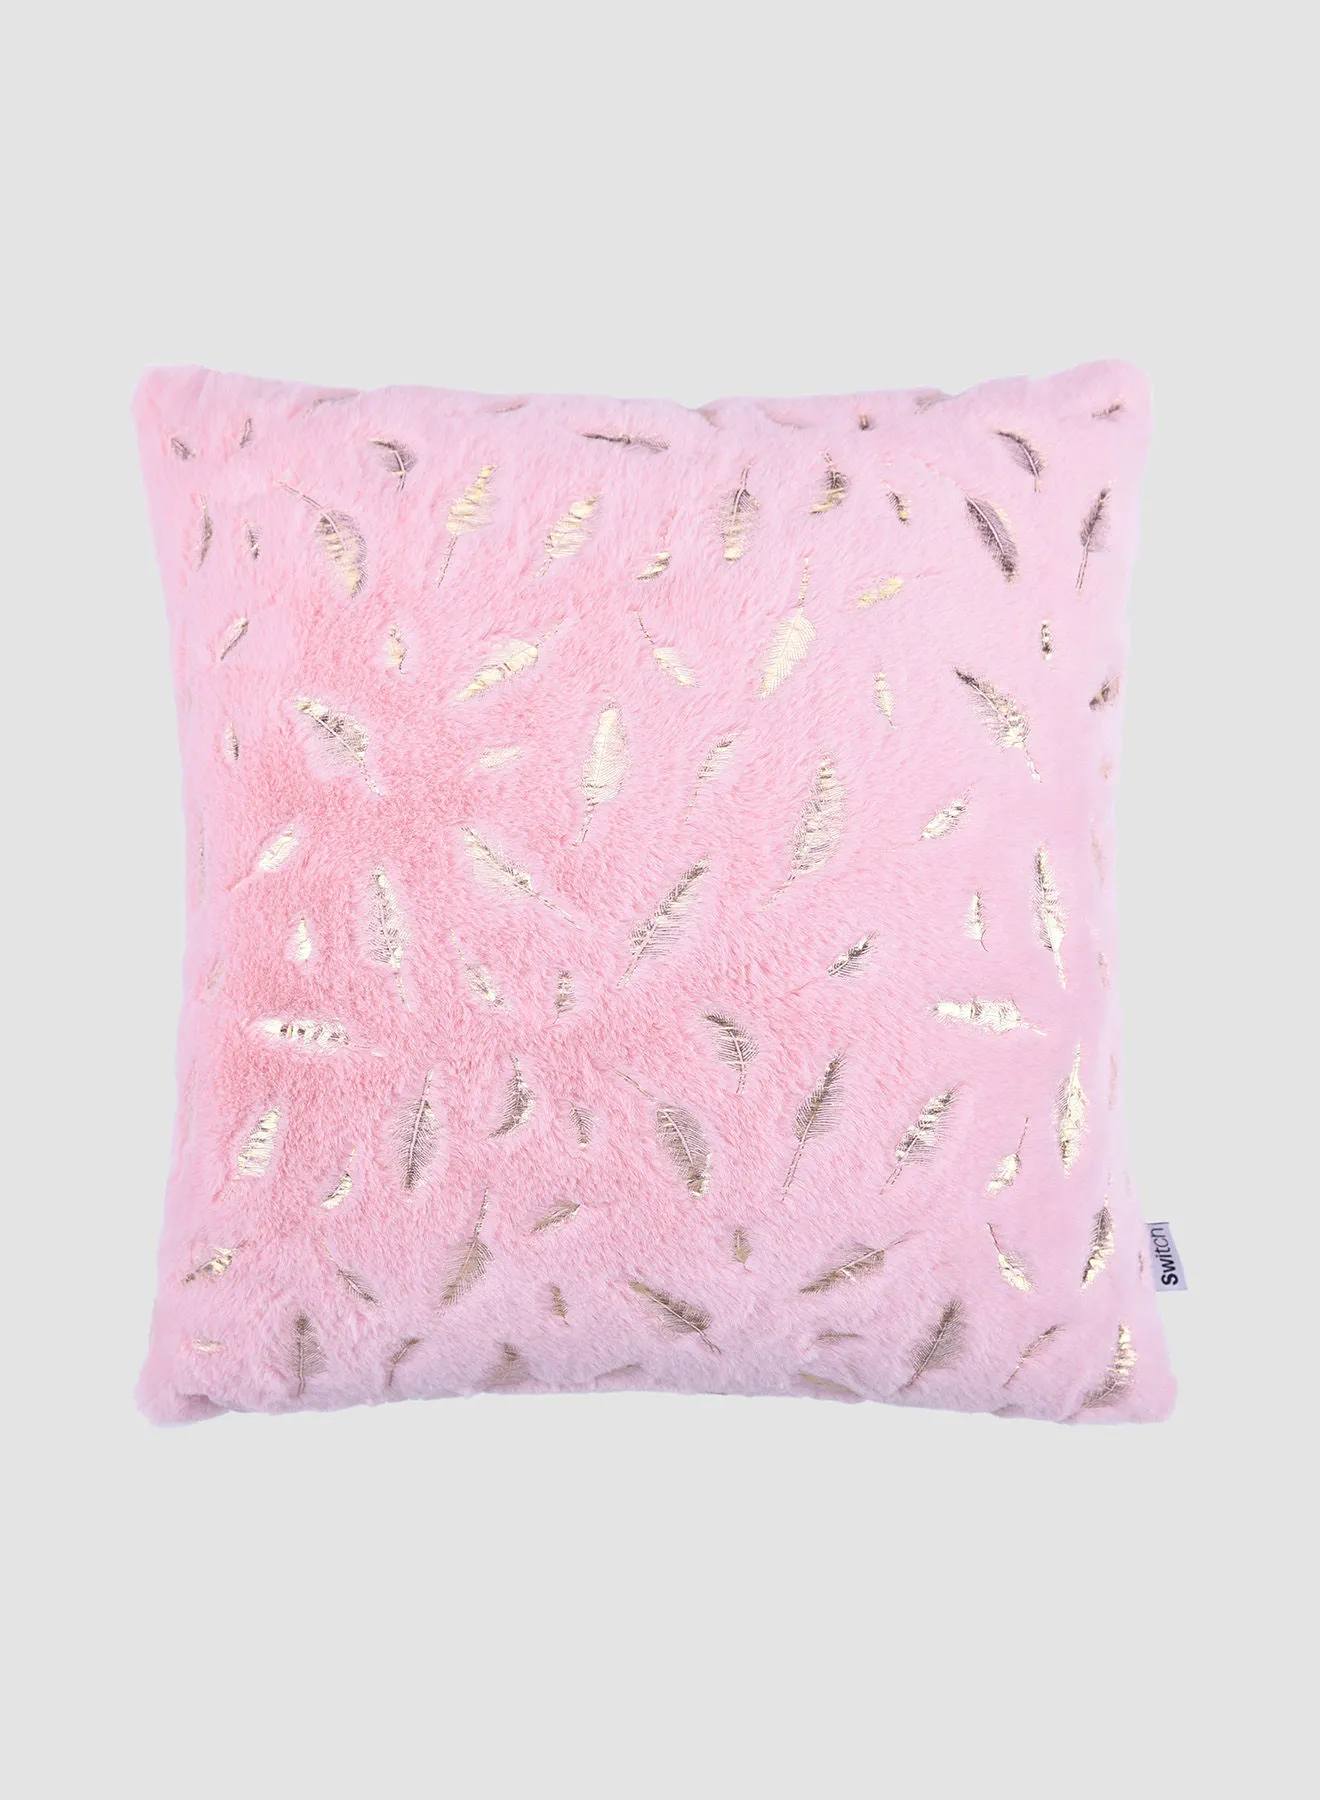 Switch Fur with Gold Feather Details, Unique Luxury Quality Decor Items for the Perfect Stylish Home Pink CUS231 45 x 45cm